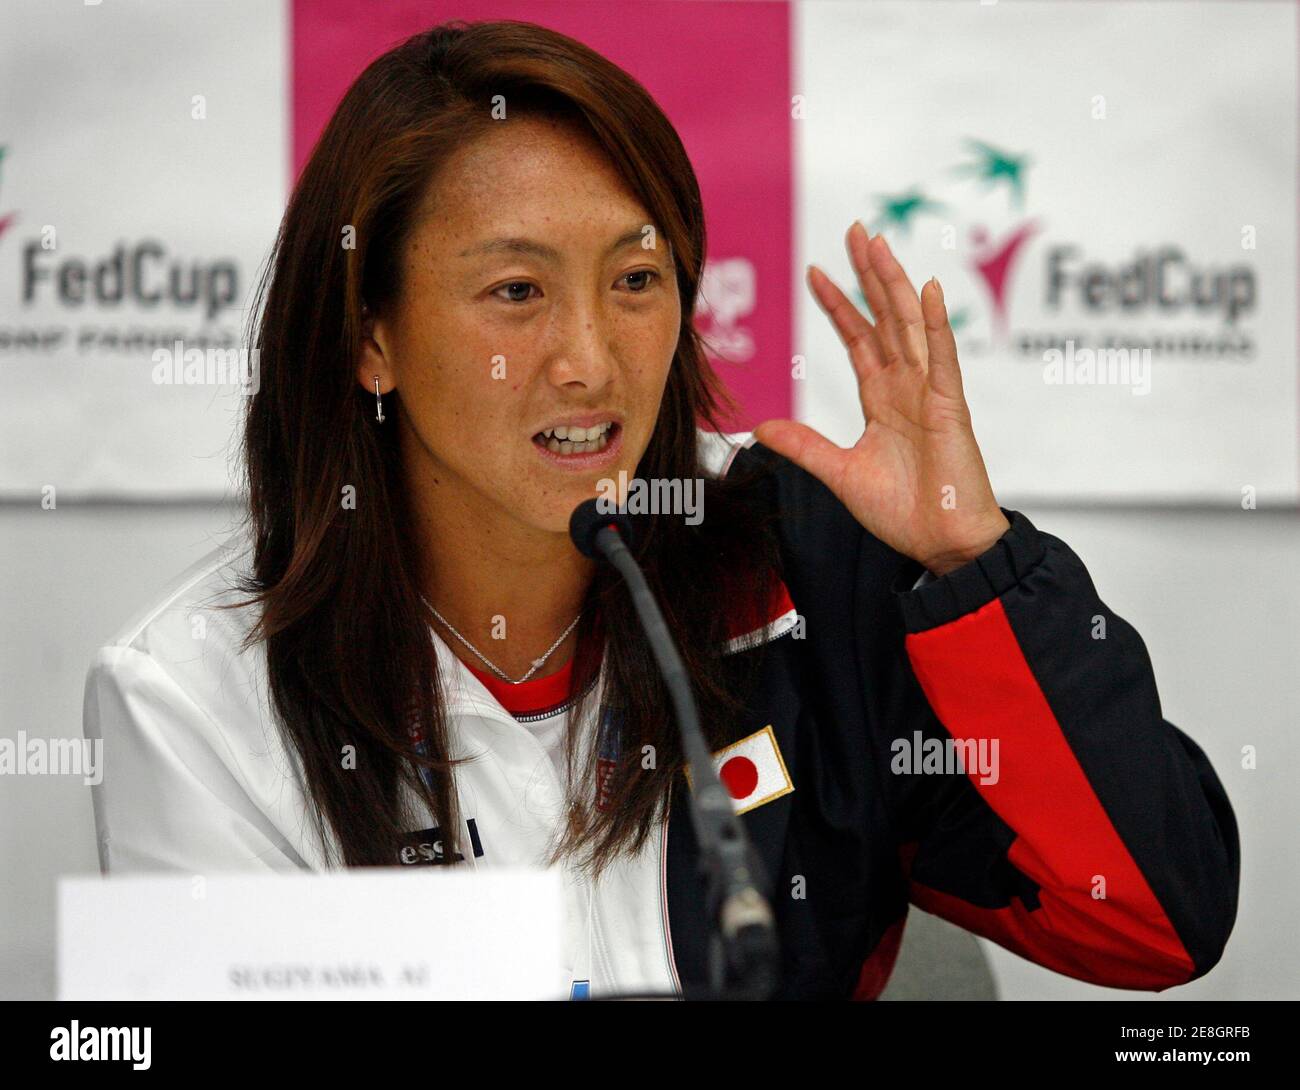 Japan's  Ai Sugiyama answers questions during a news conference in Belgrade February 4, 2009. Japan will play the Fed Cup tennis tournament against Serbia during the weekend.  REUTERS/Ivan Milutinovic  (SERBIA) Stock Photo